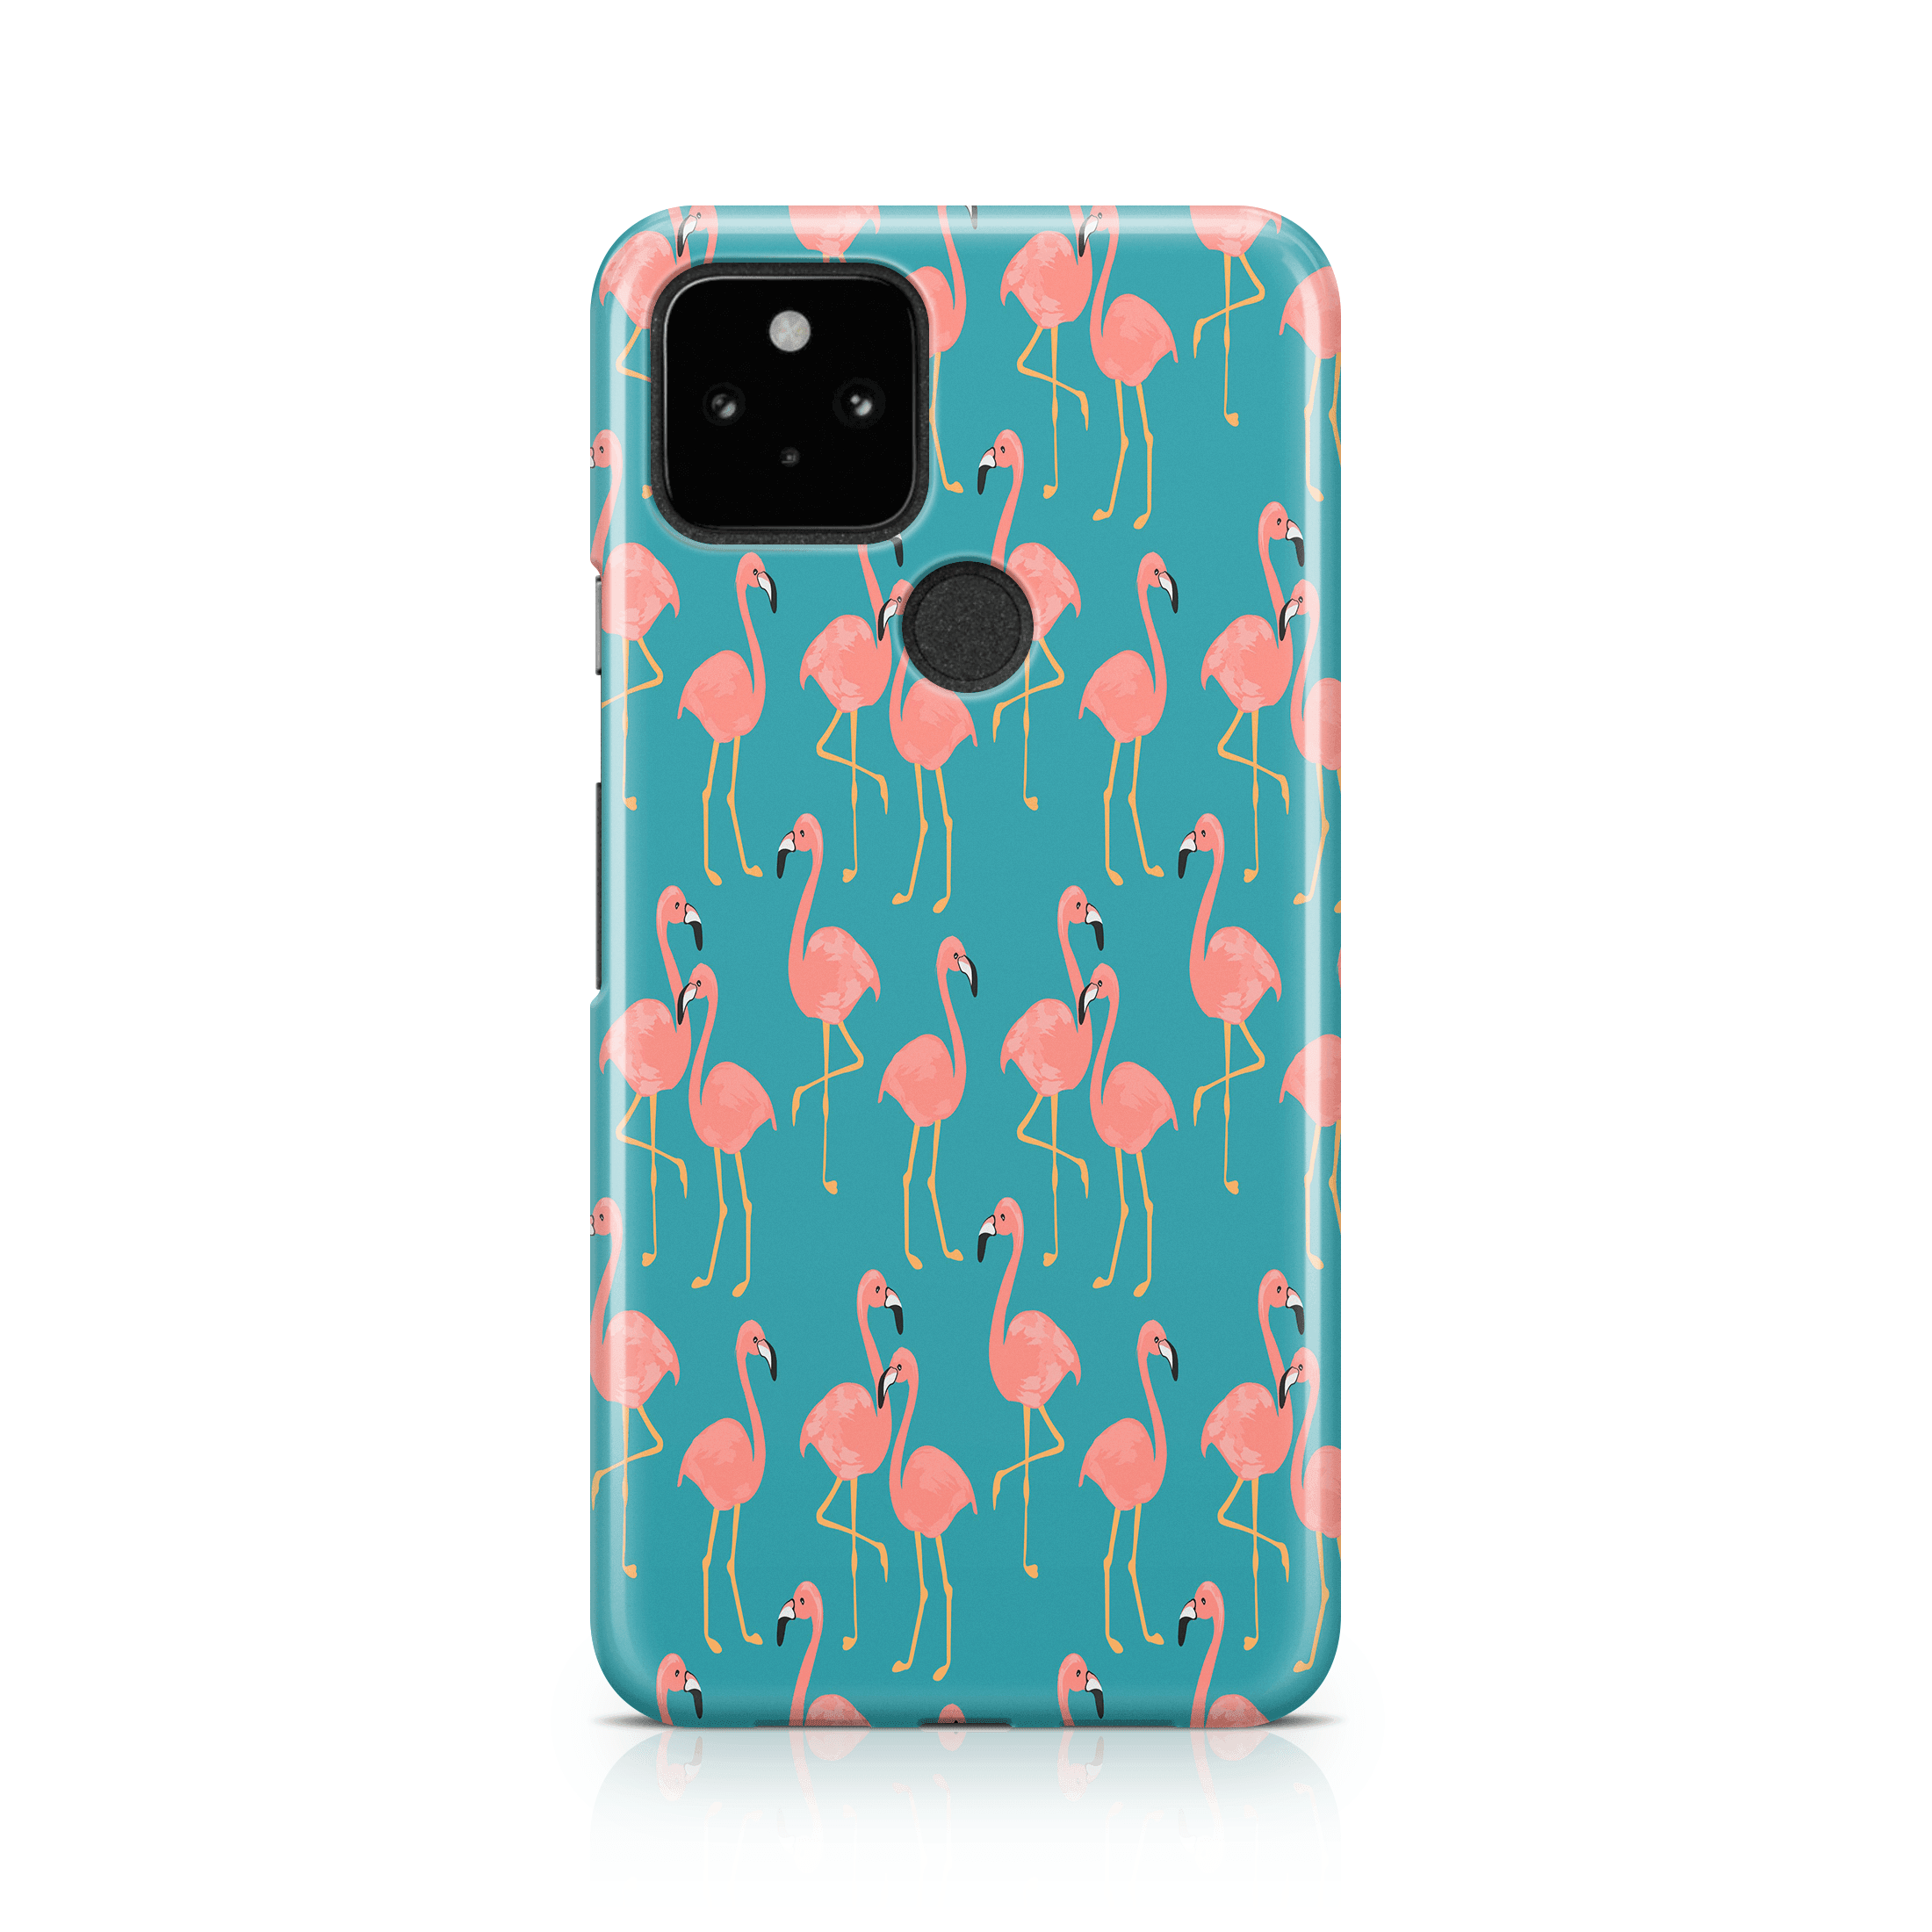 Flamingo Fiesta - Google phone case designs by CaseSwagger